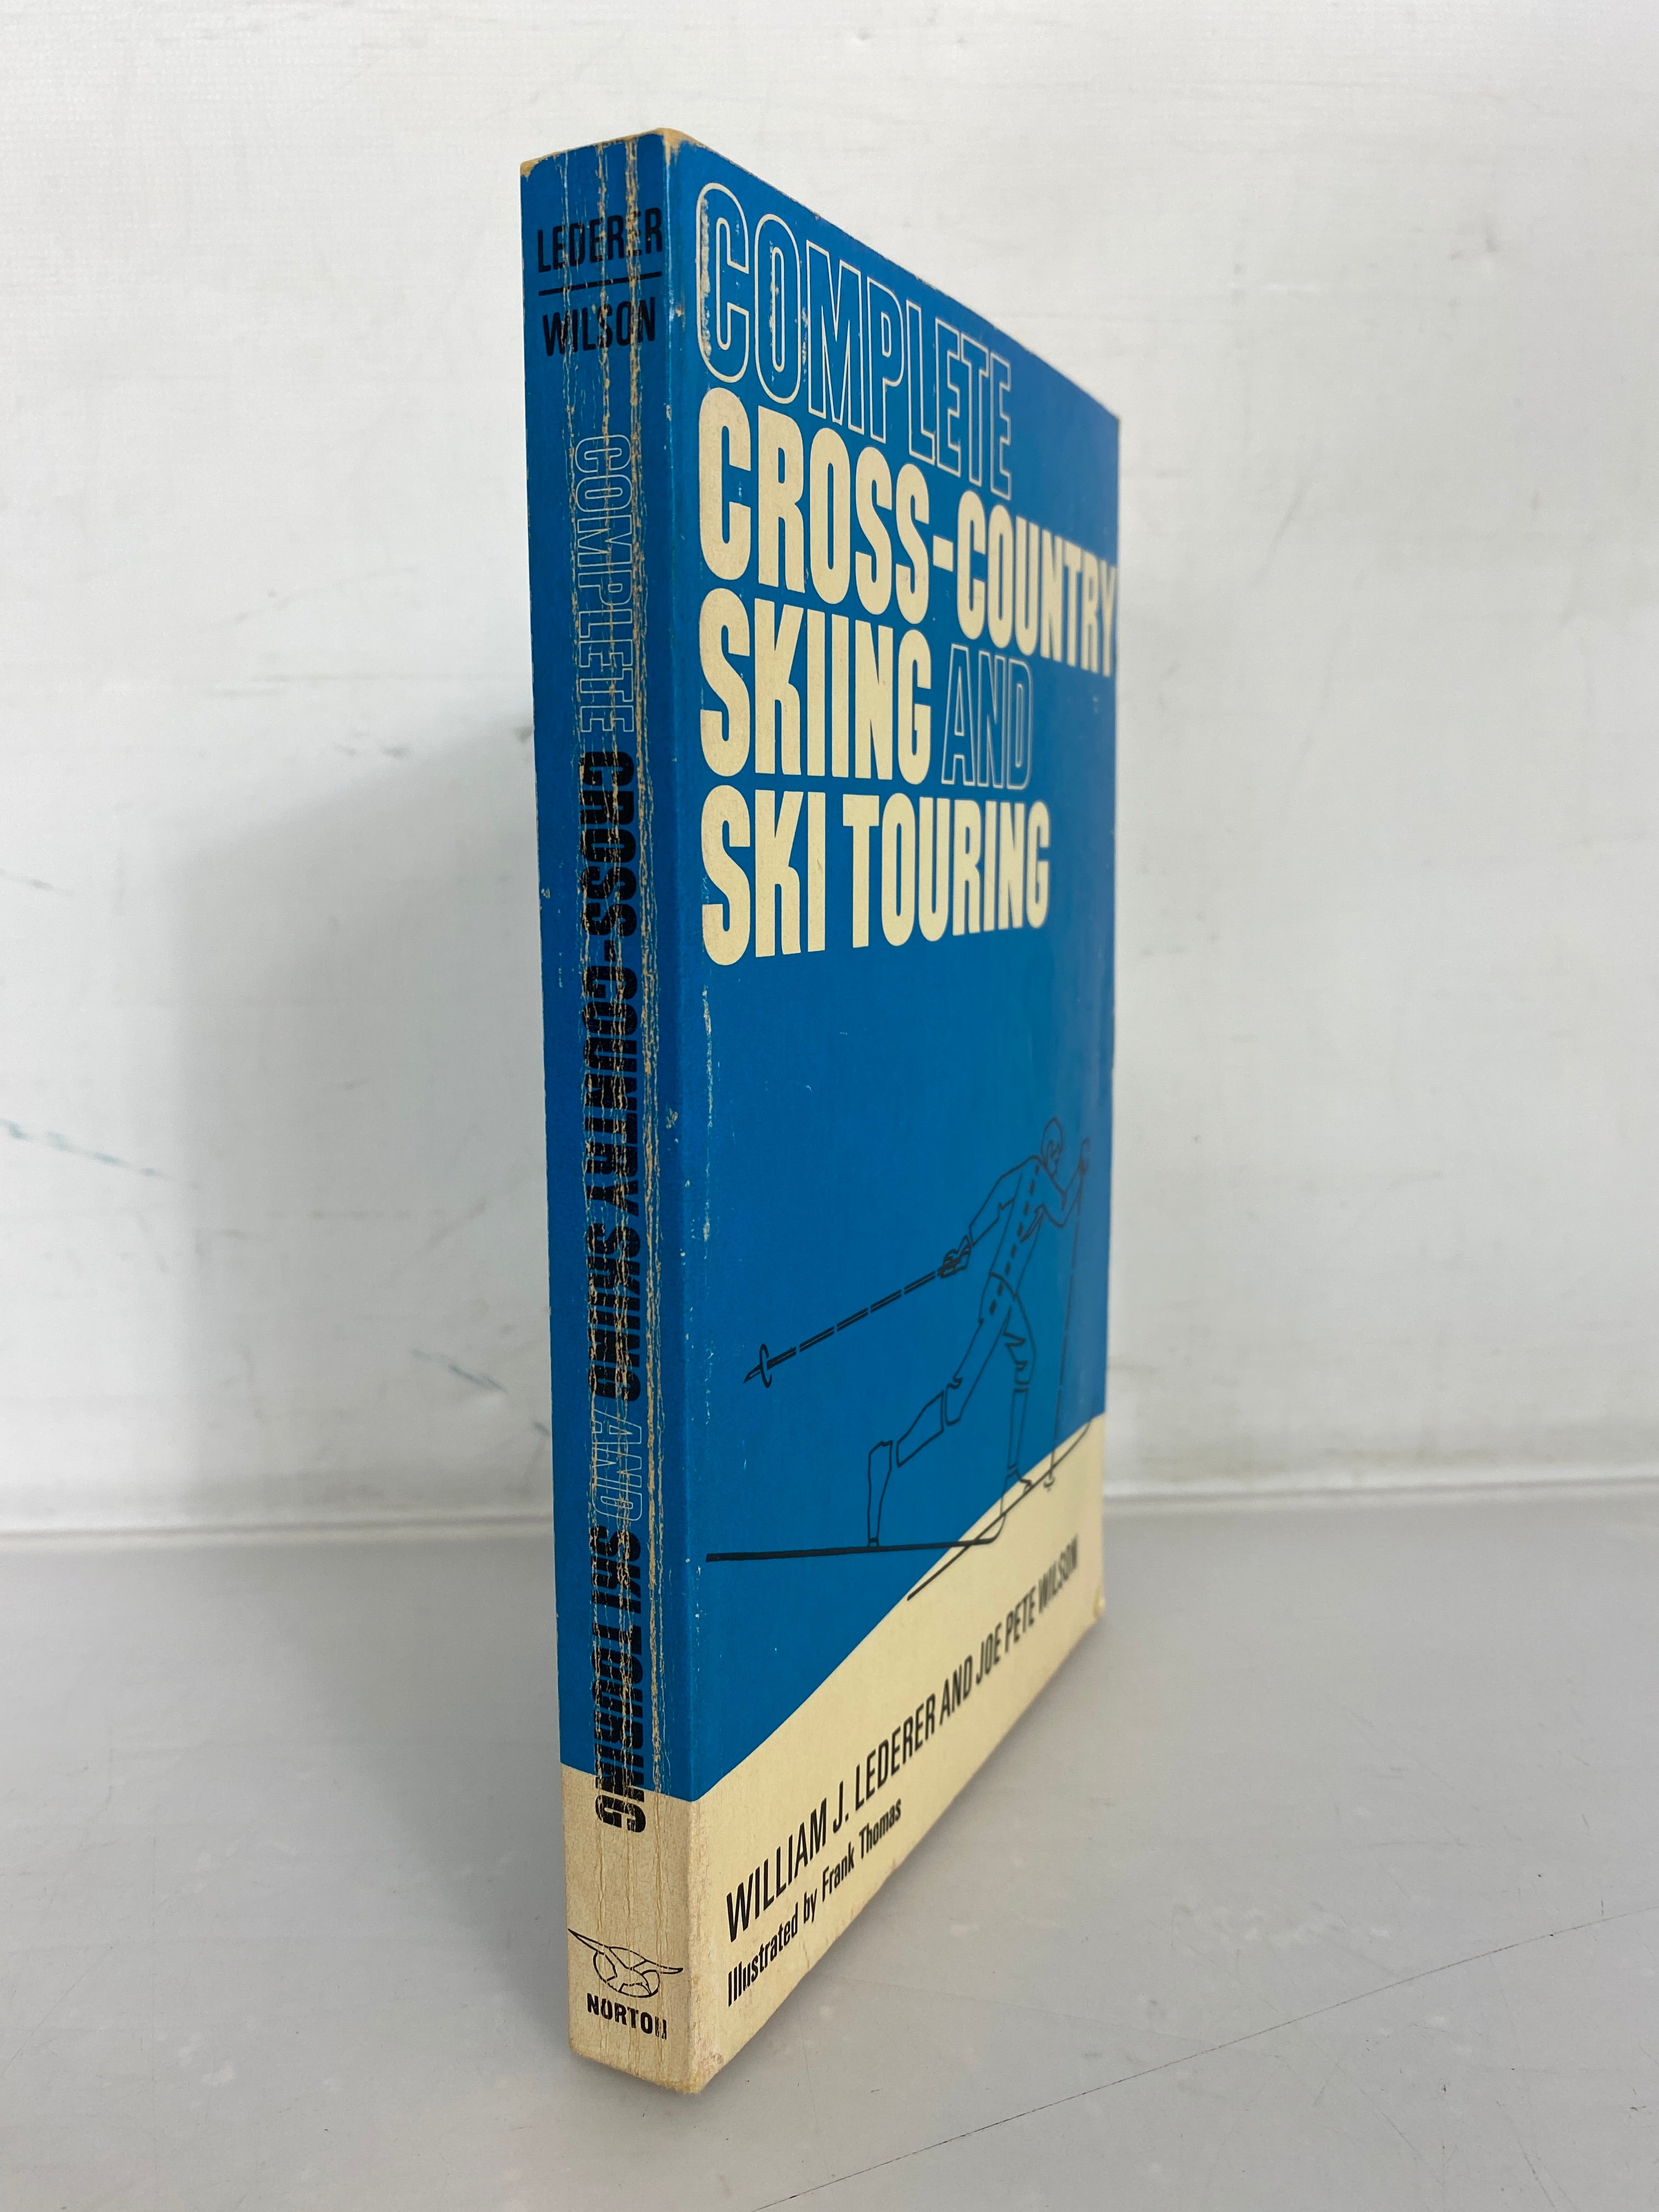 Complete Cross-Country Skiing and Ski Touring by Lederer and Wilson 1970 SC